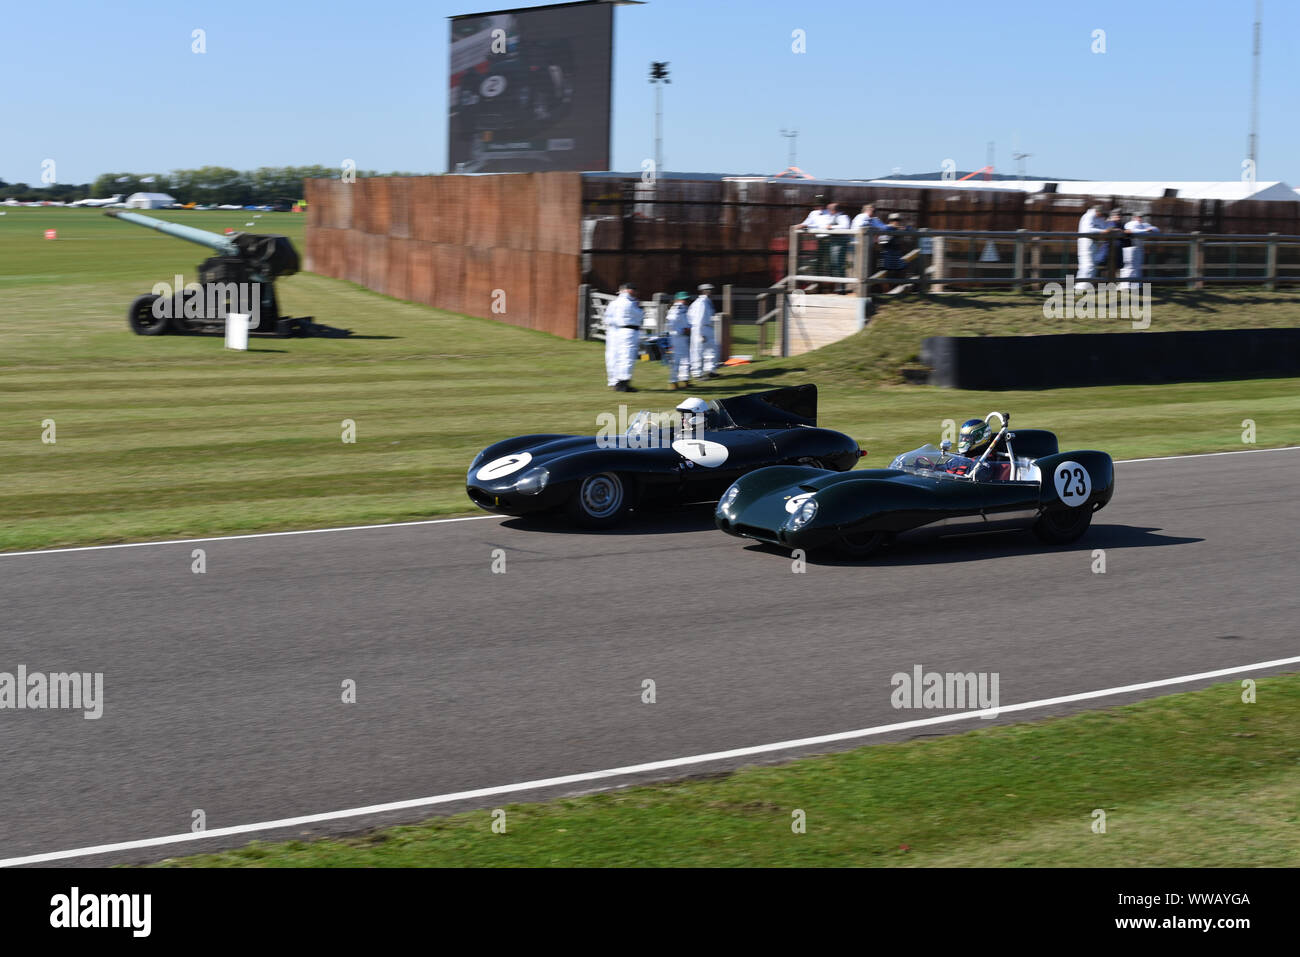 Goodwood Revival 2019 - Sussex Trophy -1955 Jaguar D-type 'long-nose' driven by Gary Pearson battling with 1959 Lotus-Climax 15 driven by Mike Malone Stock Photo